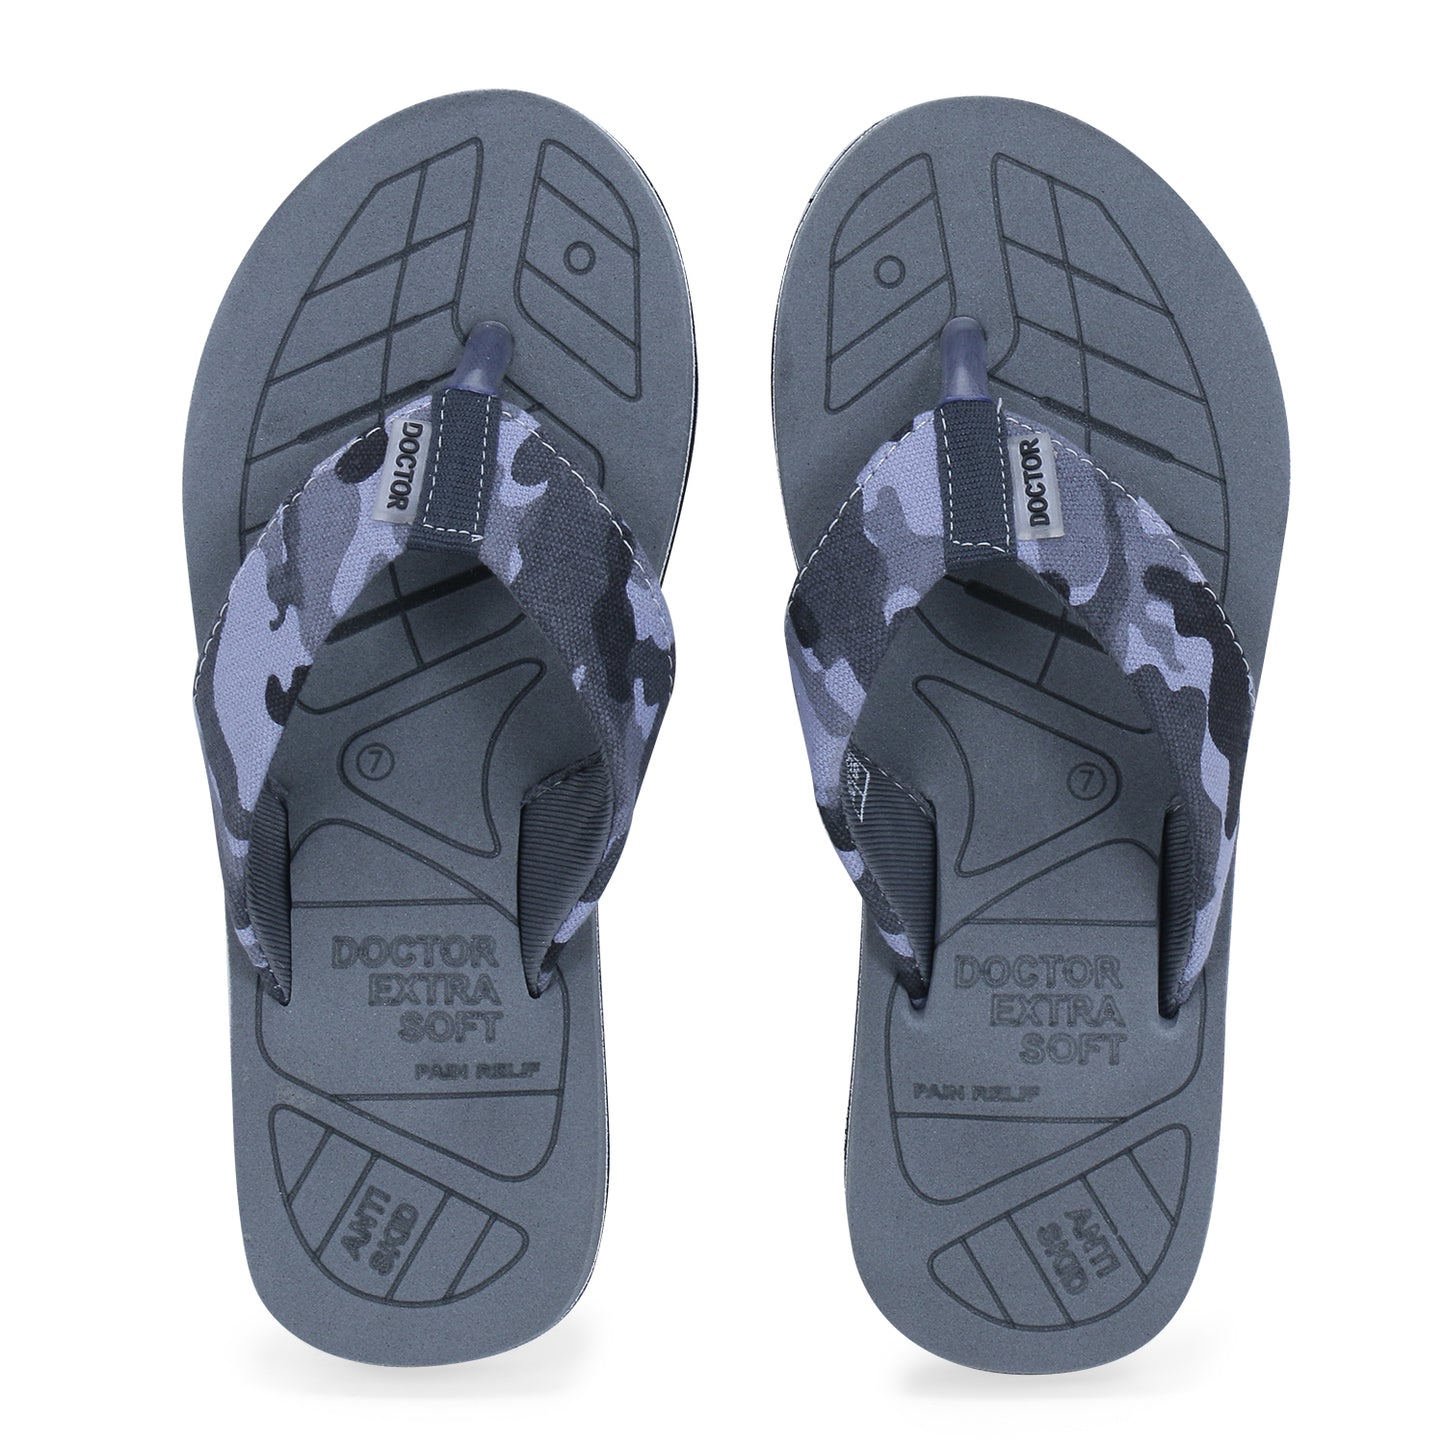 DOCTOR EXTRA SOFT D-55 Men's Camo Care Orthopaedic & Diabetic Adjustable Strap Super Comfort Flipflops & House Slippers for Men’s and Boys